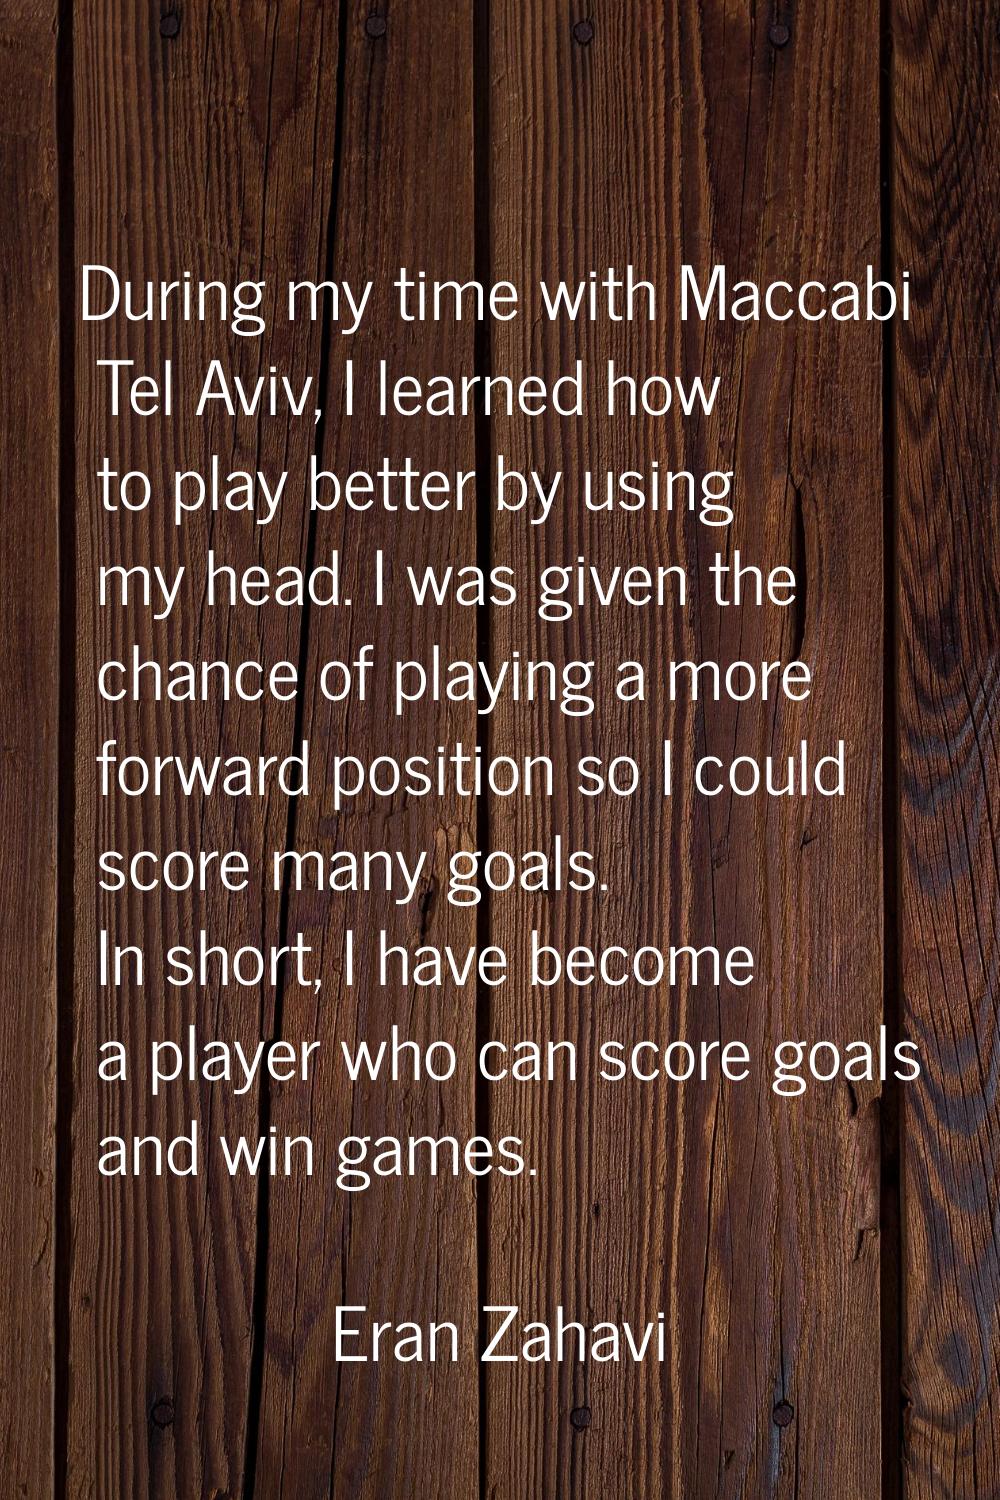 During my time with Maccabi Tel Aviv, I learned how to play better by using my head. I was given th